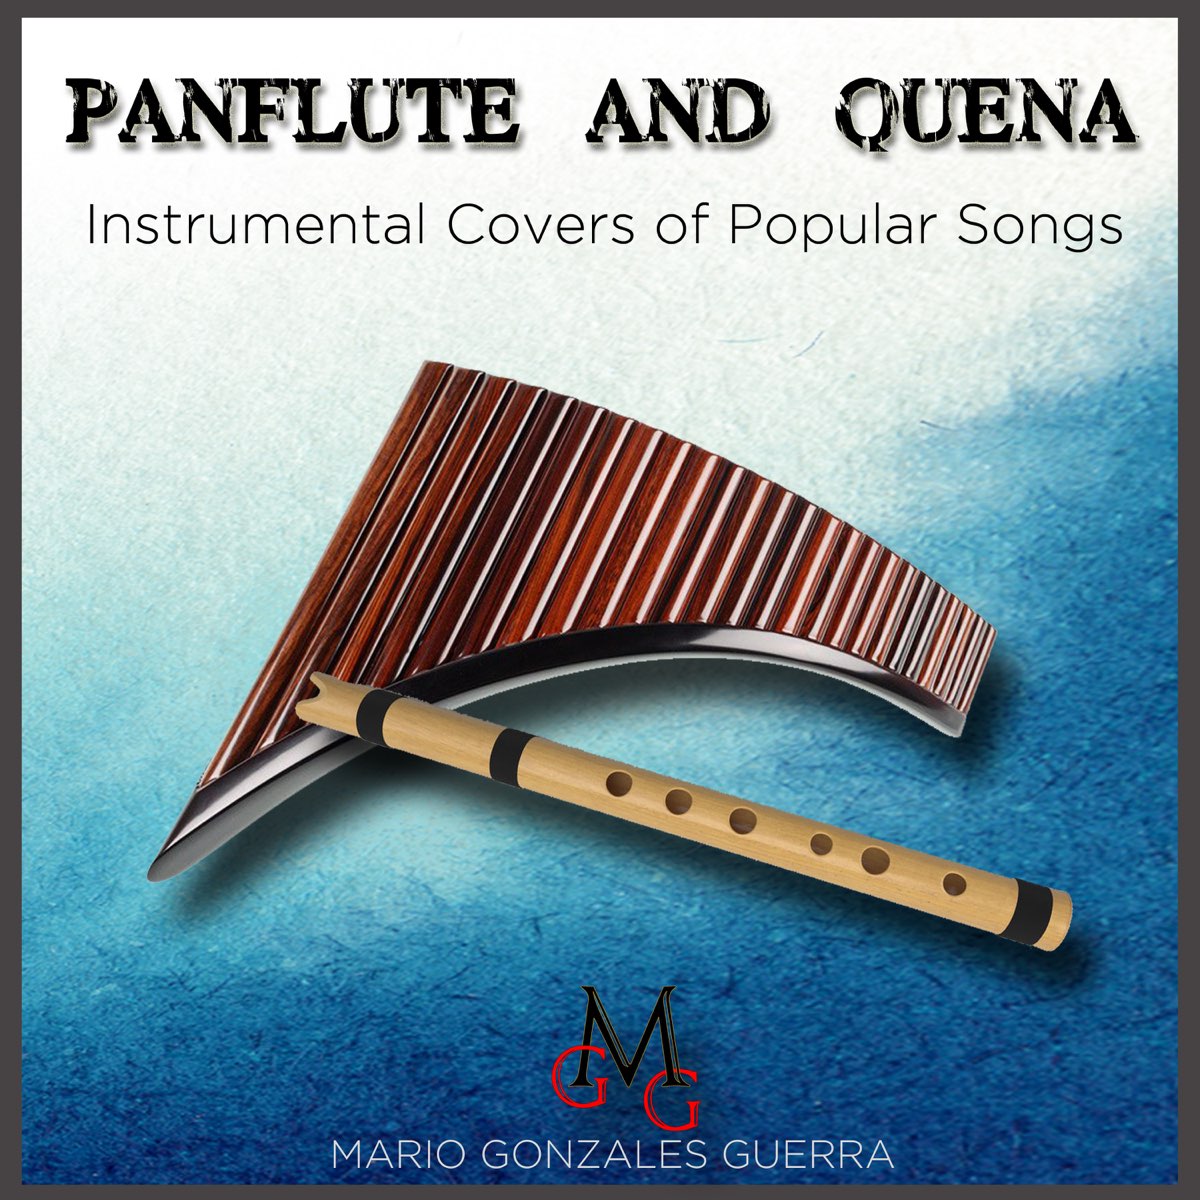 Panflute and Quena, Instrumental Covers of Popular Songs - Album by Mario  Gonzales Guerra - Apple Music